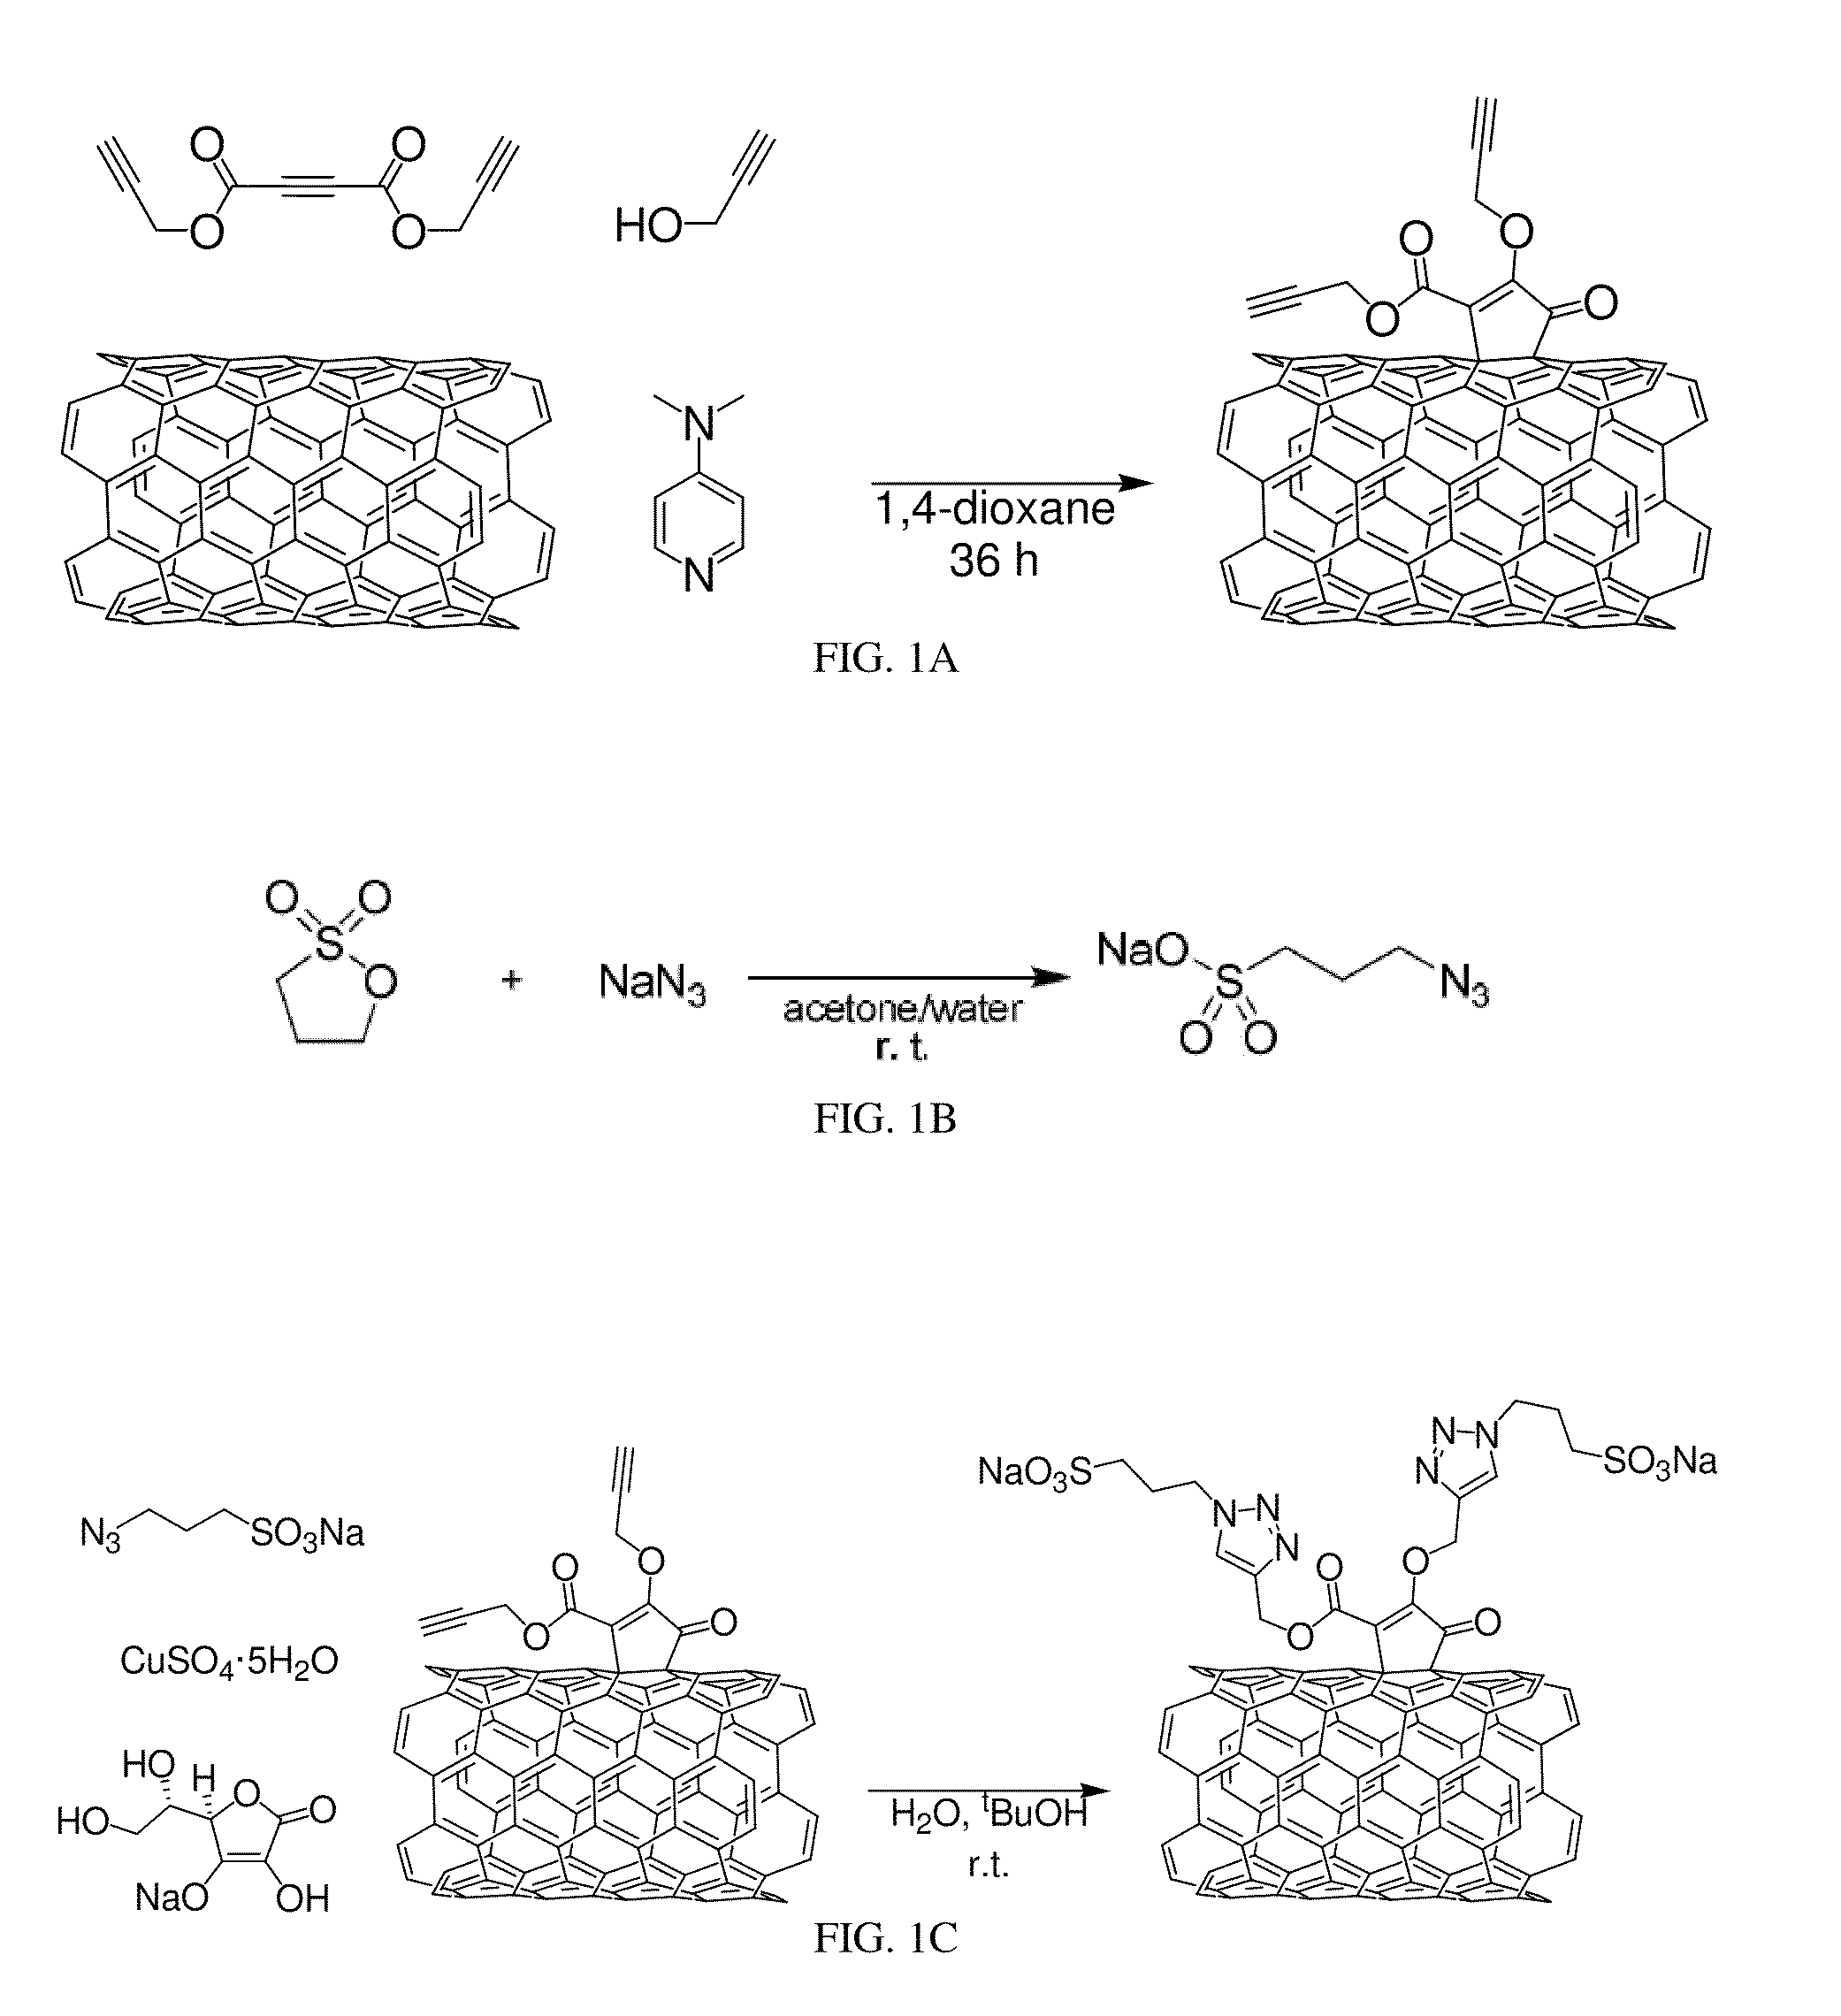 High charge density structures, including carbon-based nanostructures and applications thereof